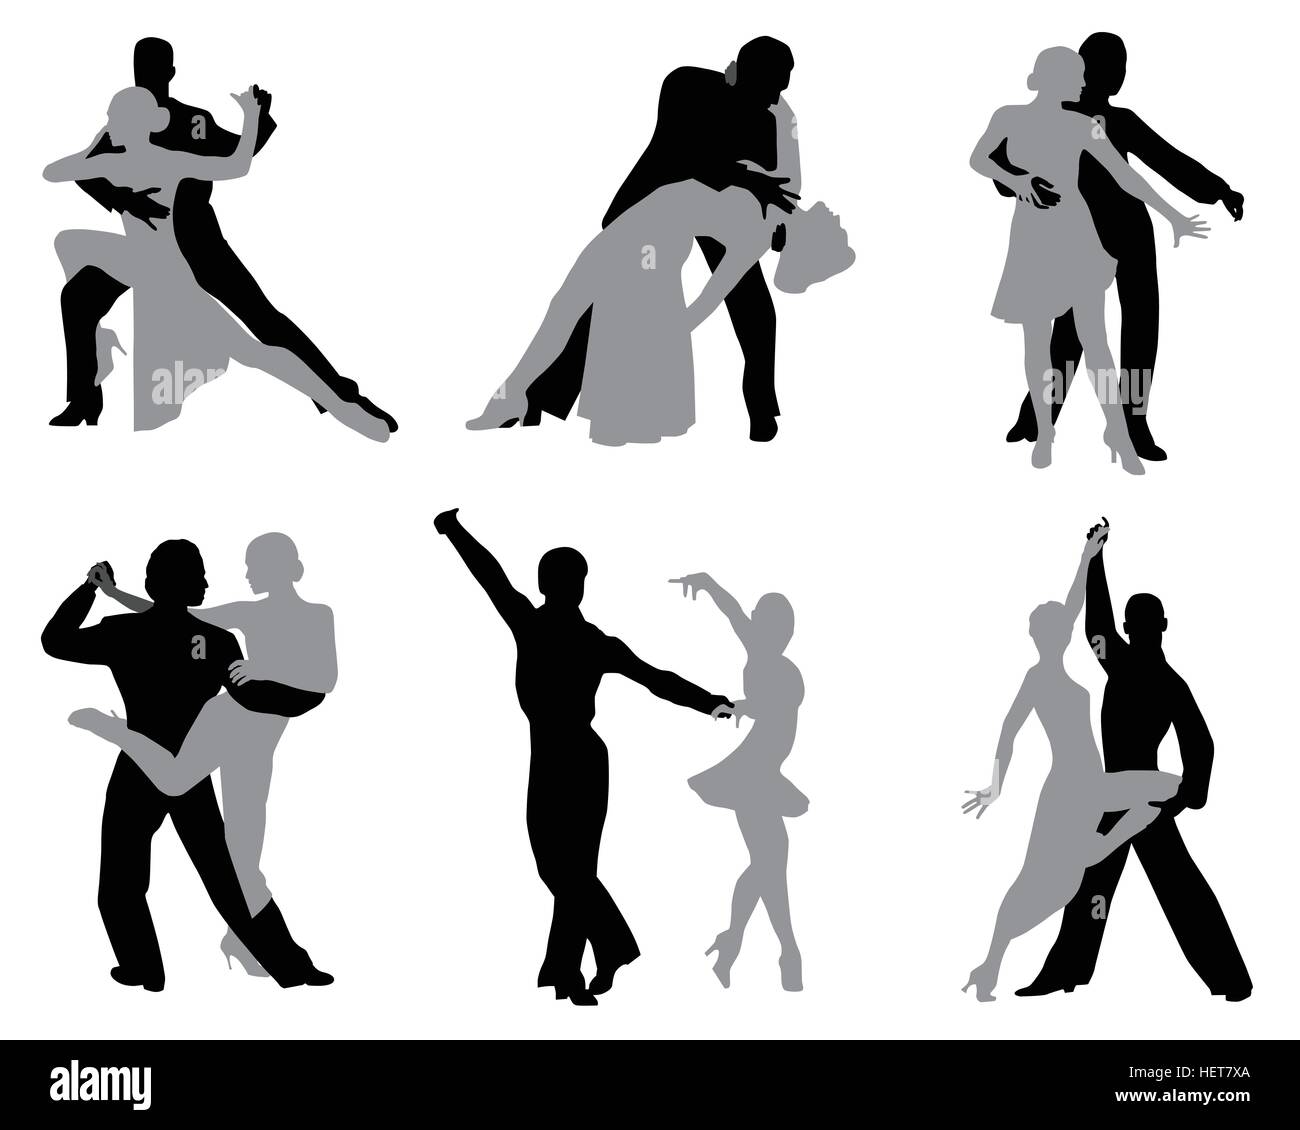 Silhouettes of the dancing couples, different styles of dance Stock Vector